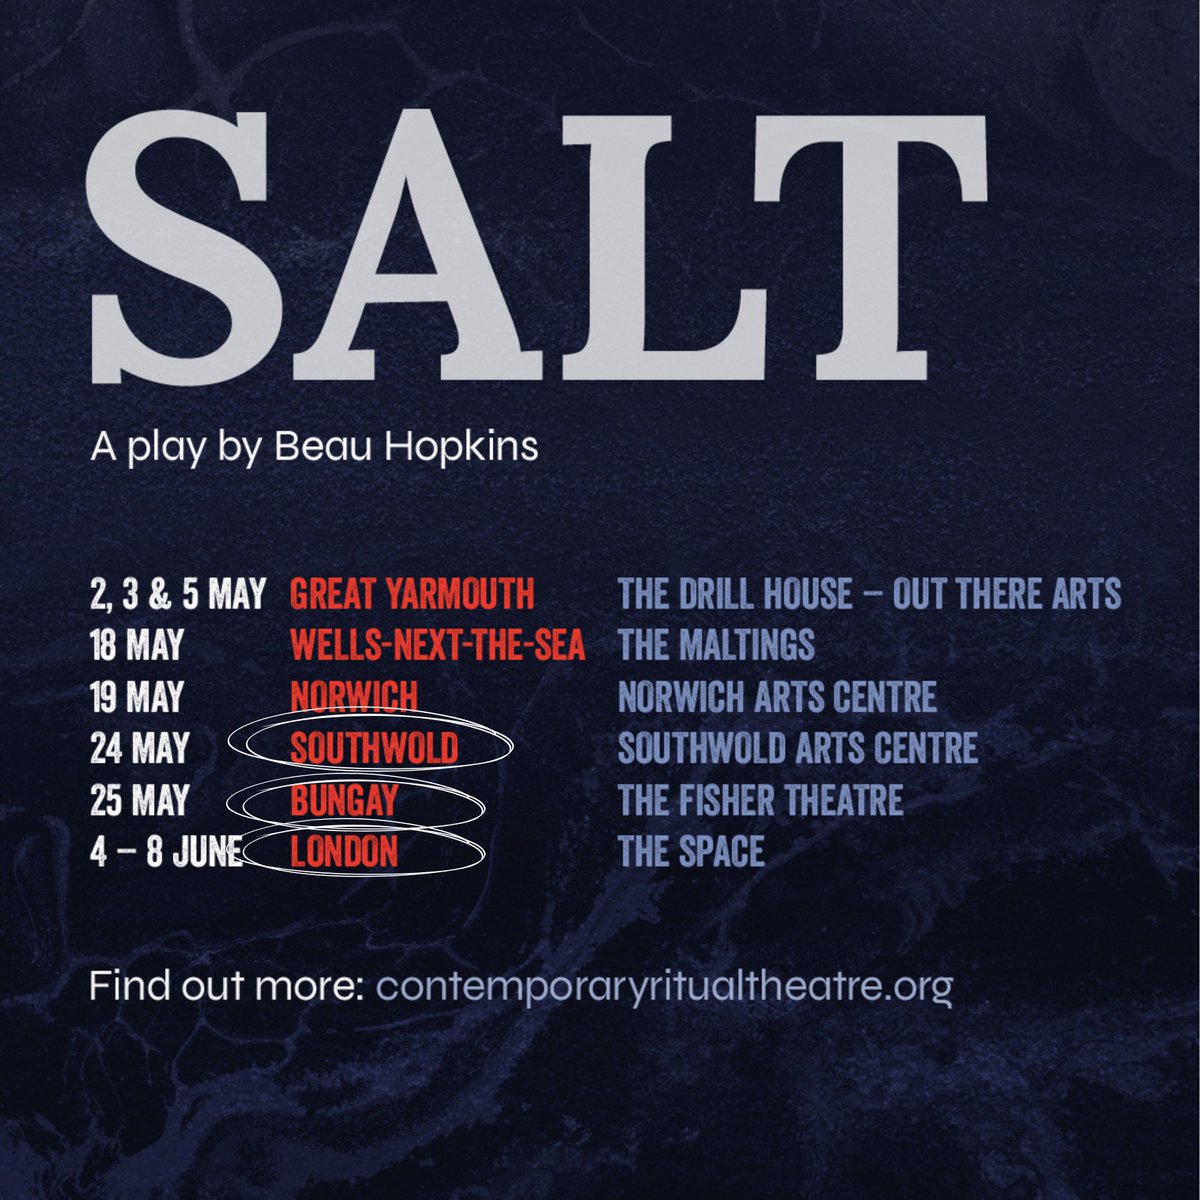 A SOLD OUT weekend of shows for #SALT @WellsMaltings & @NorwichArts. Thanks to everyone who came! UP NEXT is @ArtsSouthwold & @FisherTheatre FOLLOWED BY @SpaceArtsCentre in LONDON. You can purchase tickets via the link in our bio... #SaltPlay #RitualTheatre #britishtheatre